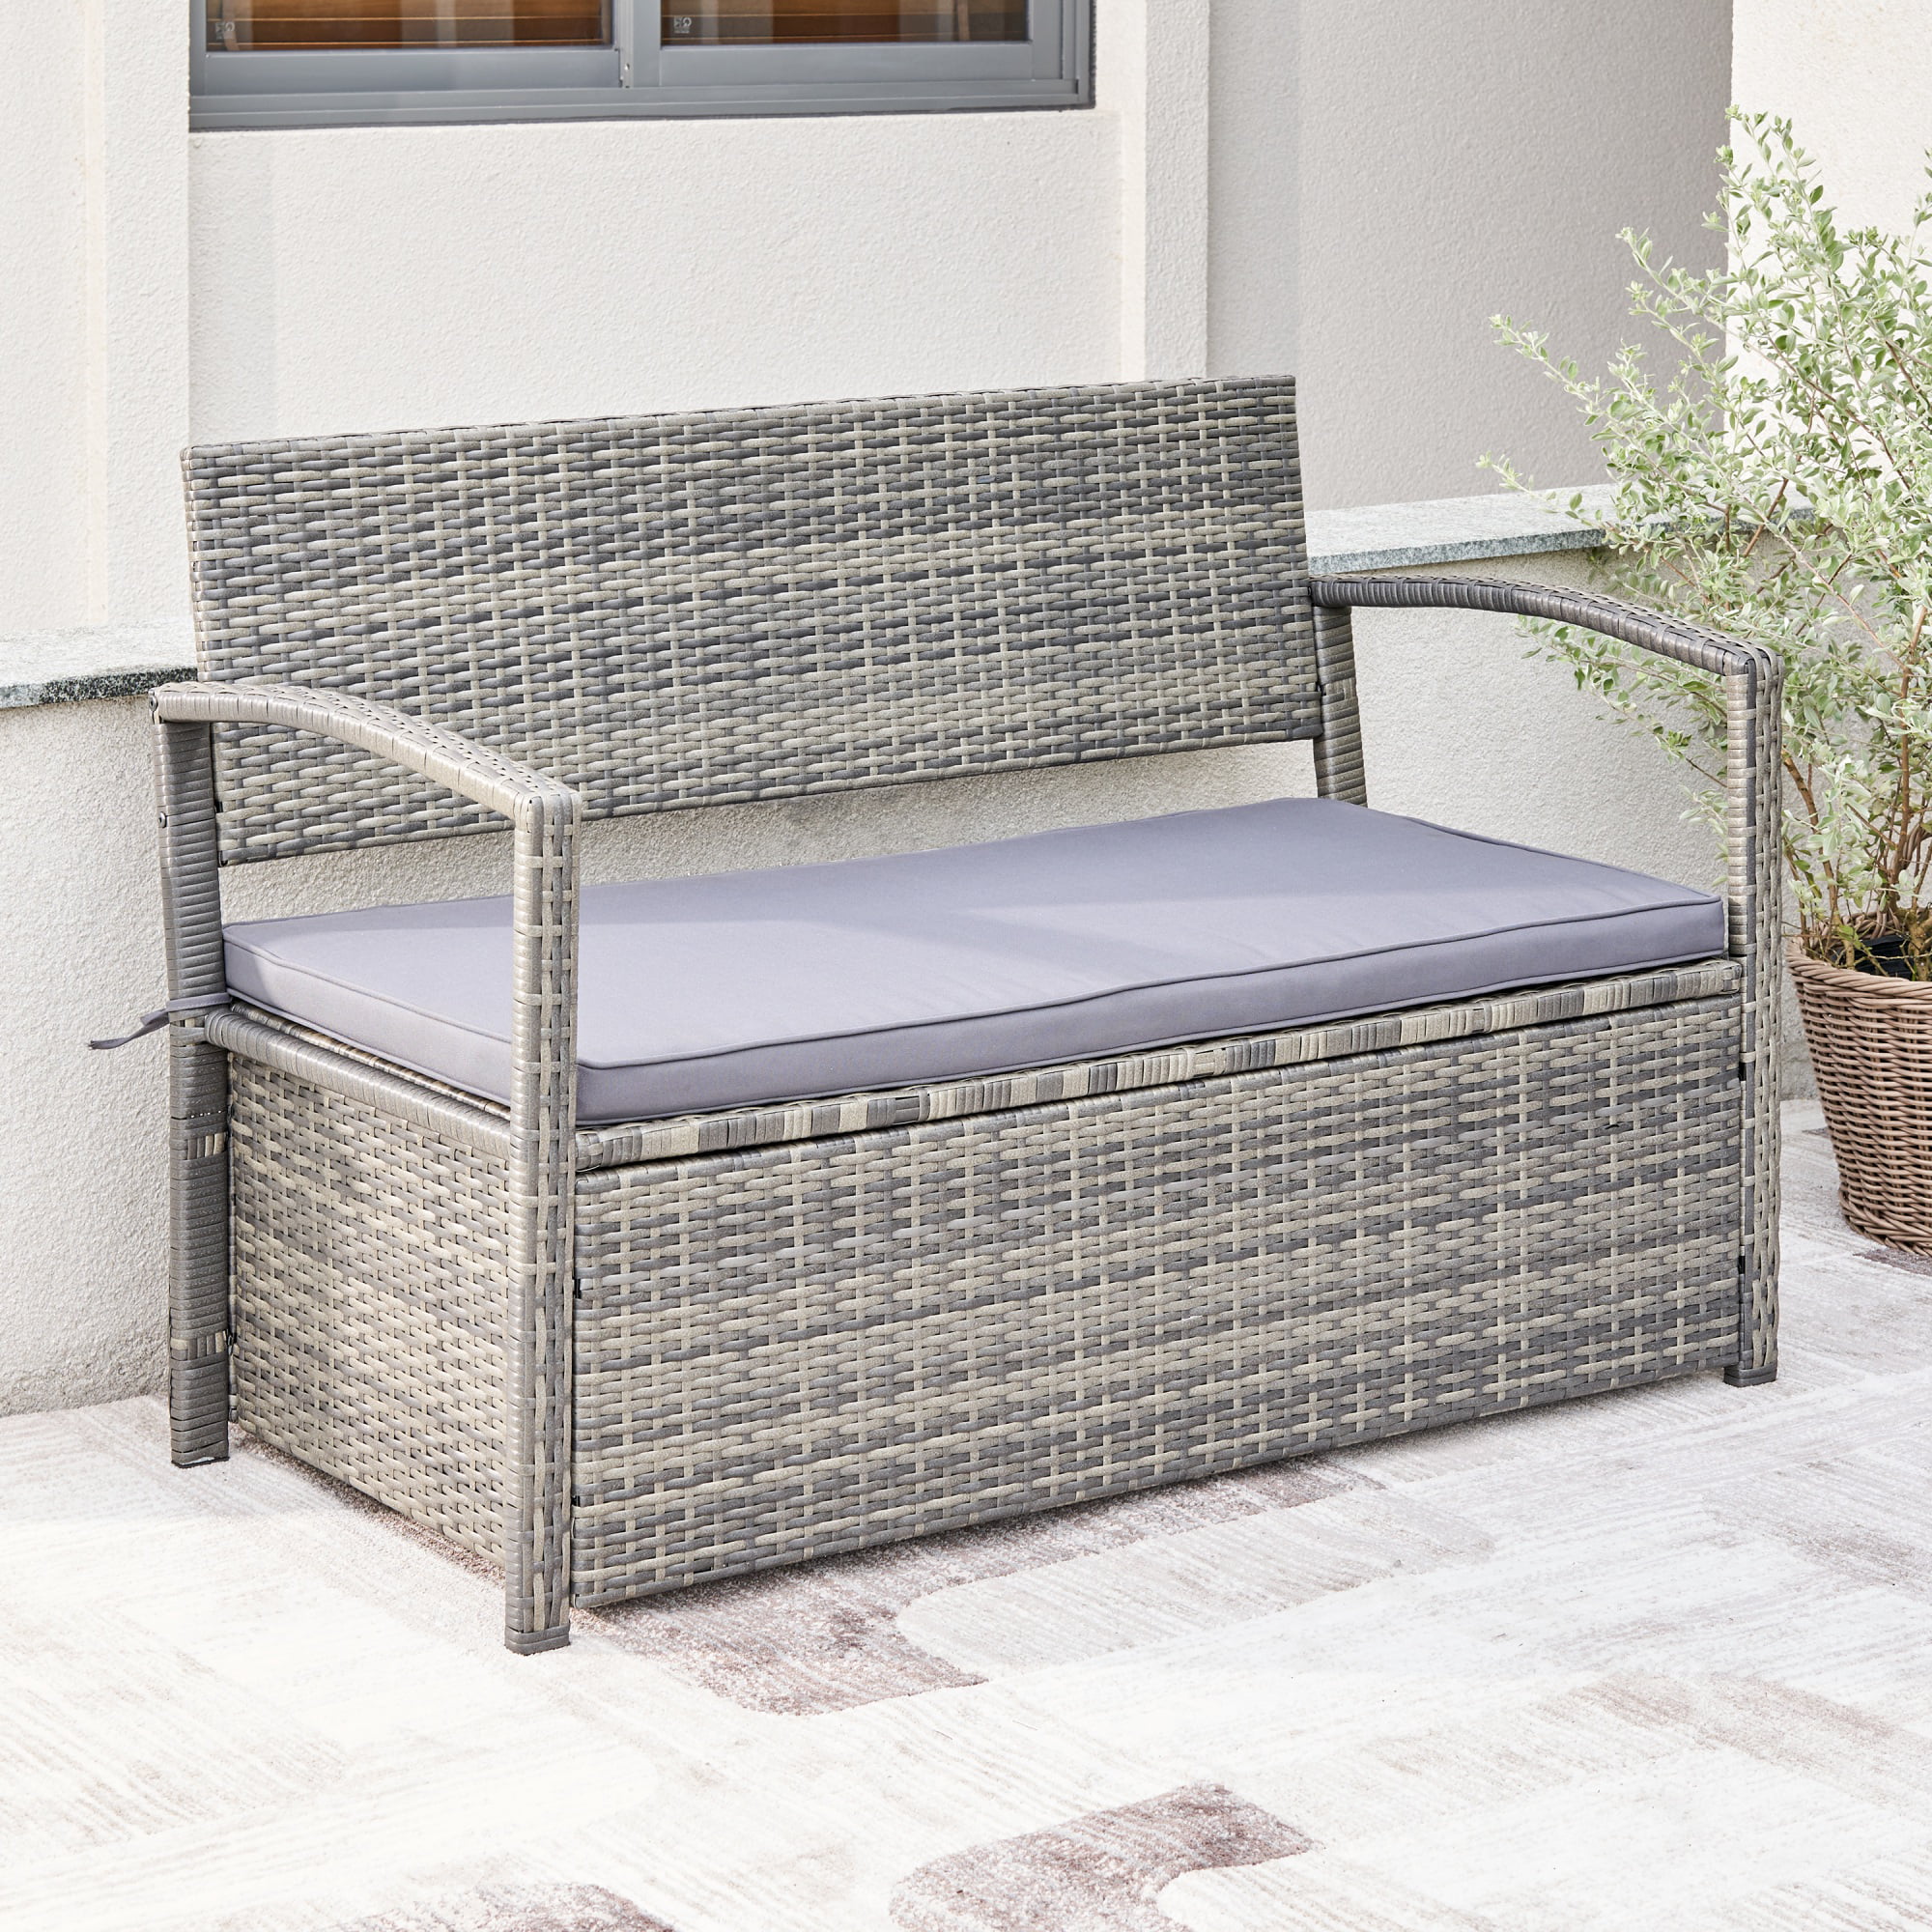 Gabrielle All-weather Resin Wicker Lounge Patio Sofa Storage Bench in Grey with Cushion